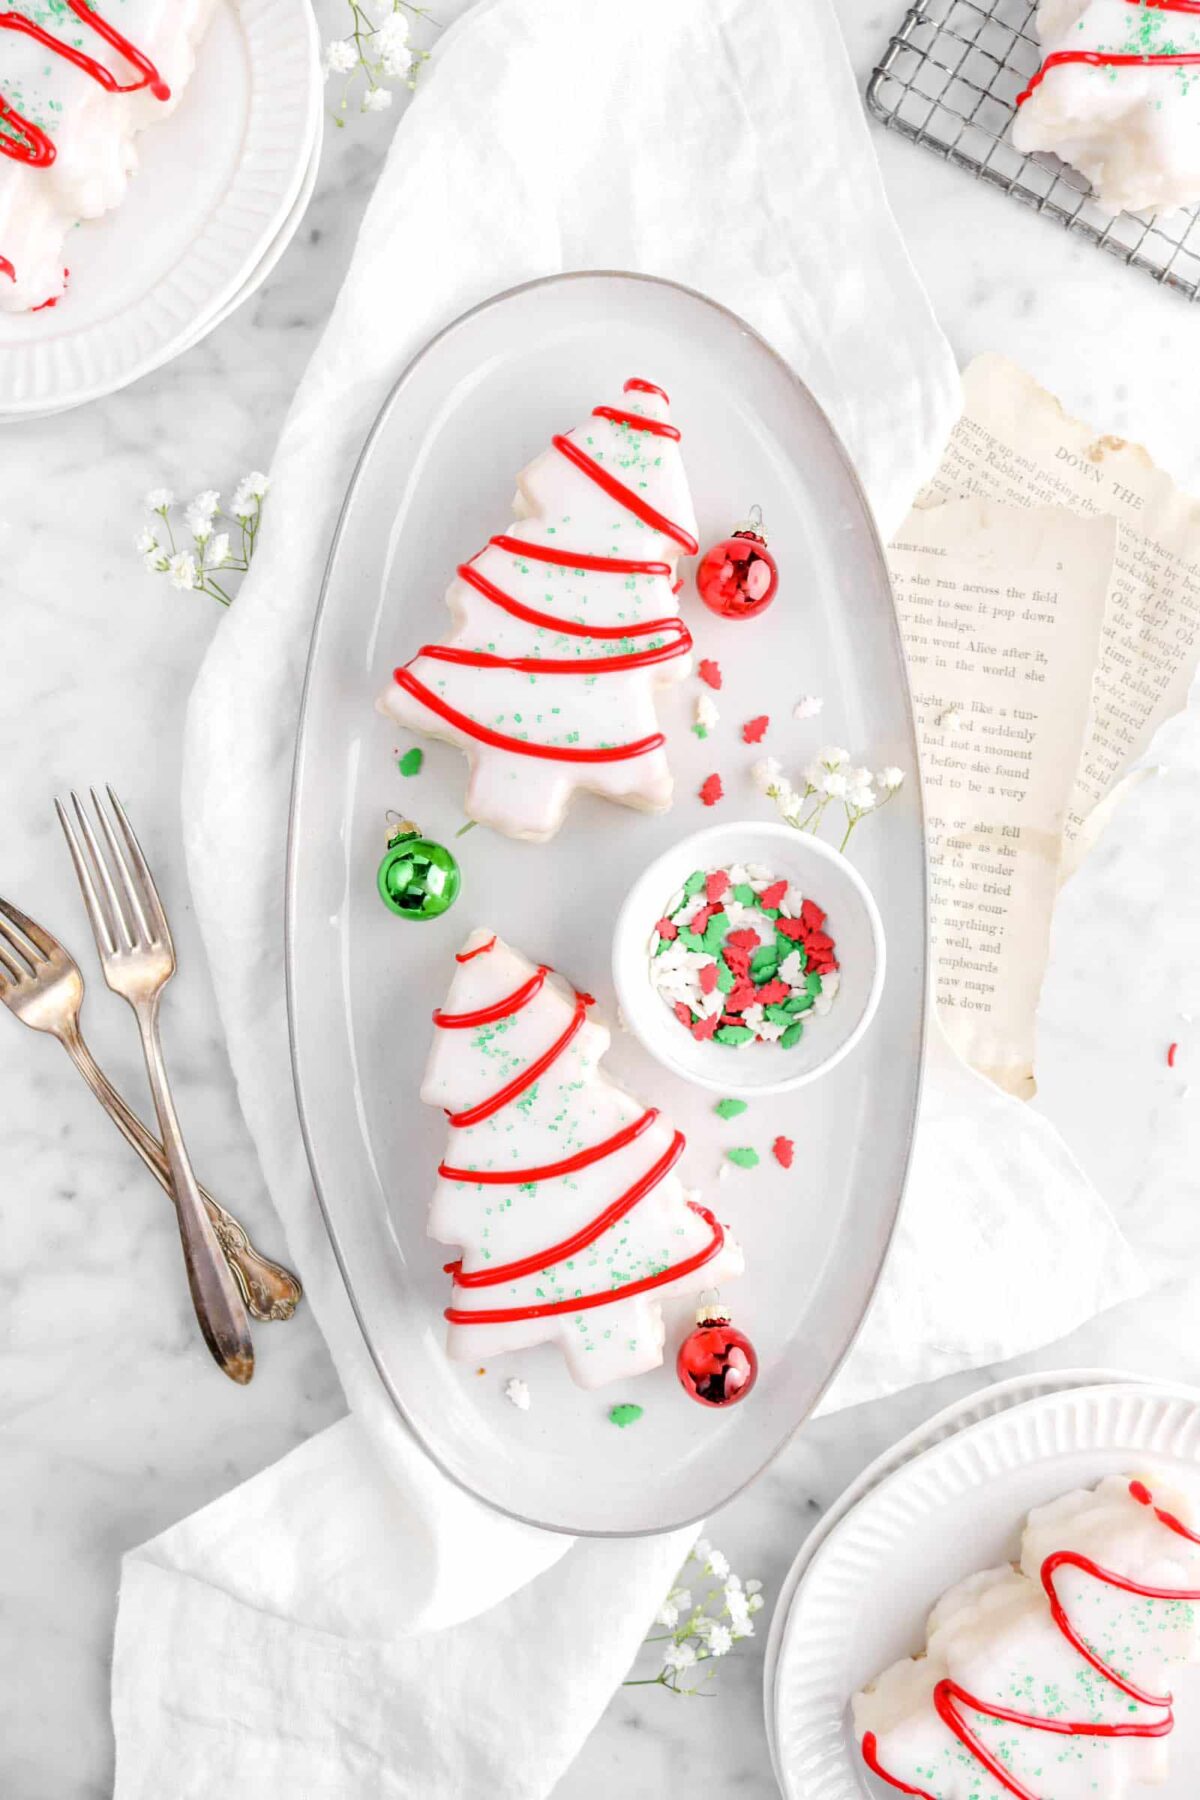 two cakes on serving plate with sprinkles, red and green ornaments, and flowers on top of a white napkin with two forks, book pages, and plates